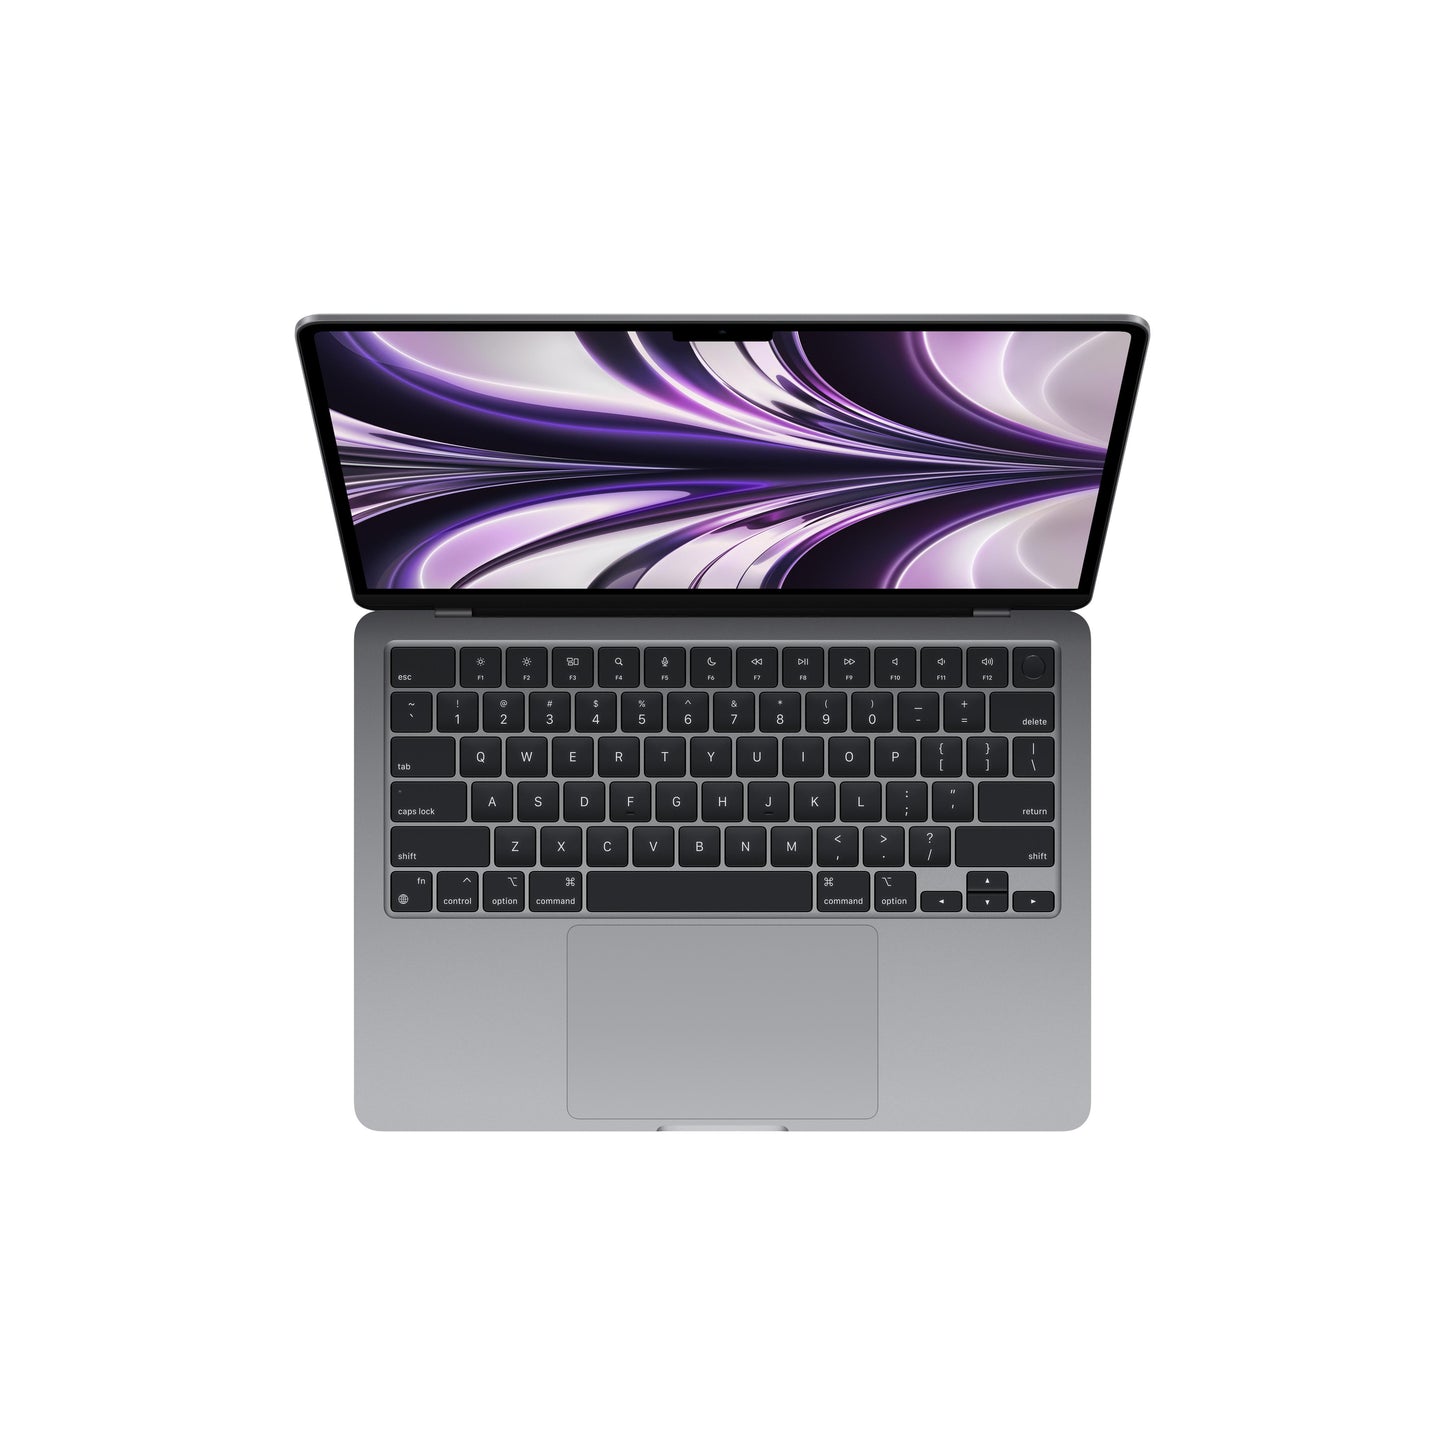 13-inch MacBook Air: Apple M2 chip with 8-core CPU and 10-core GPU, 512GB SSD - Space Grey